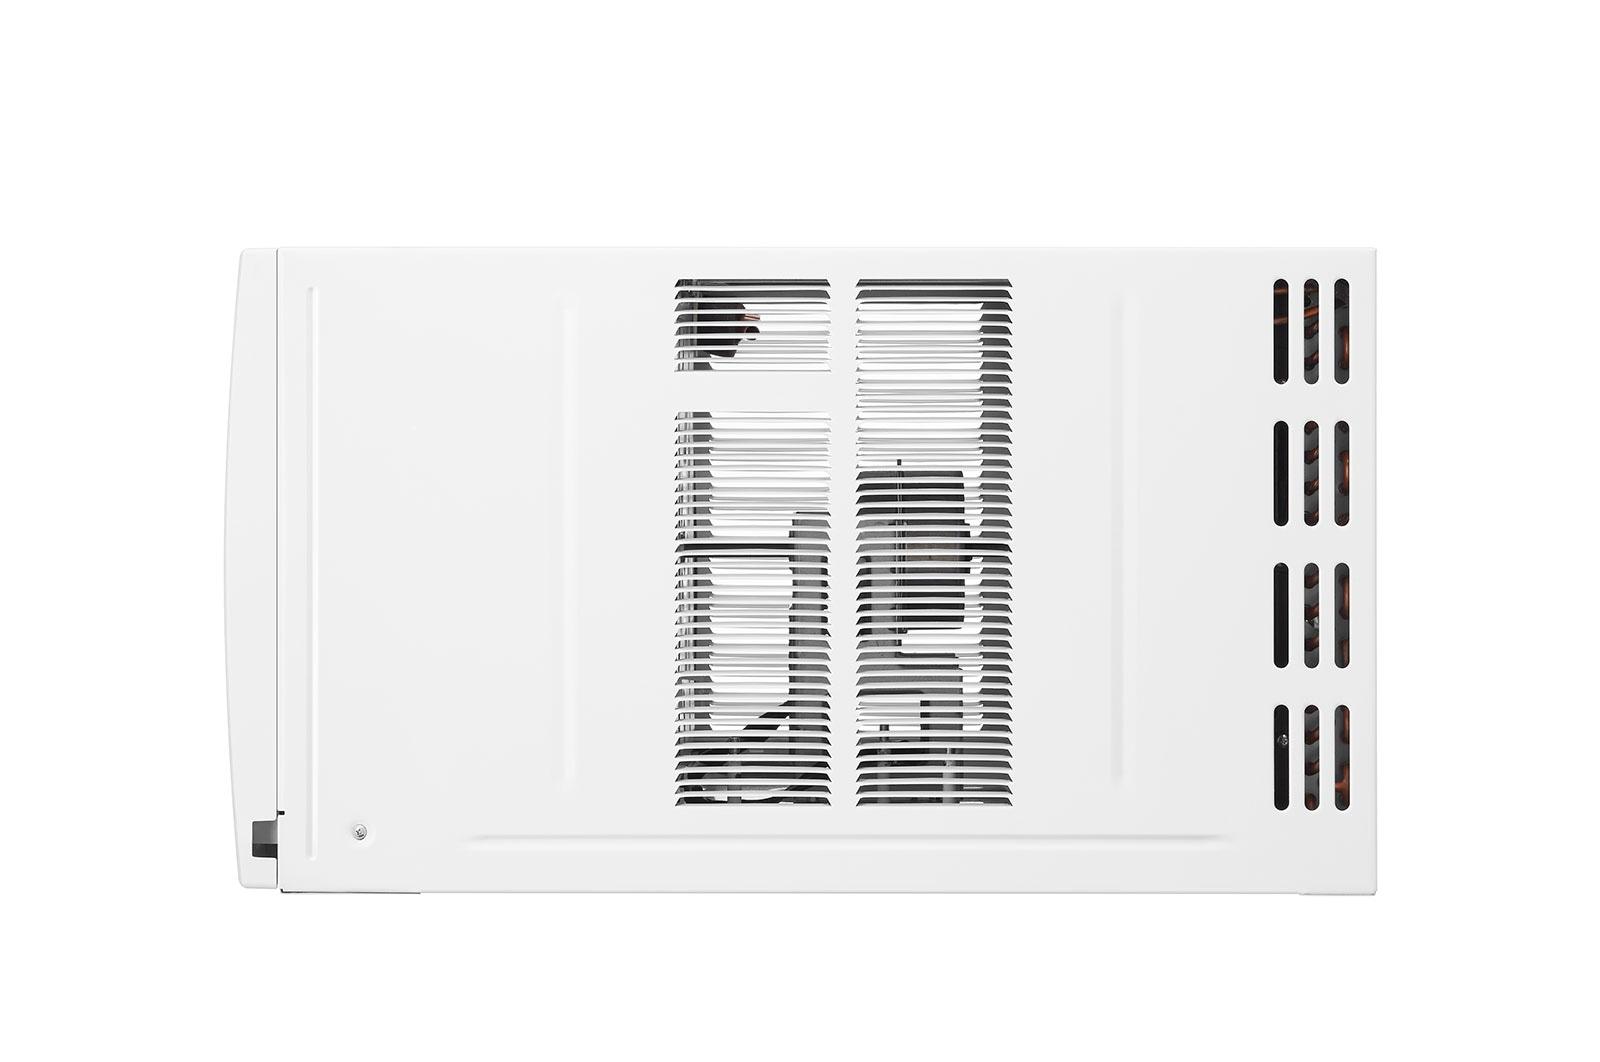 Lg 18,000 BTU Smart Wi-Fi Enabled Window Air Conditioner, Cooling